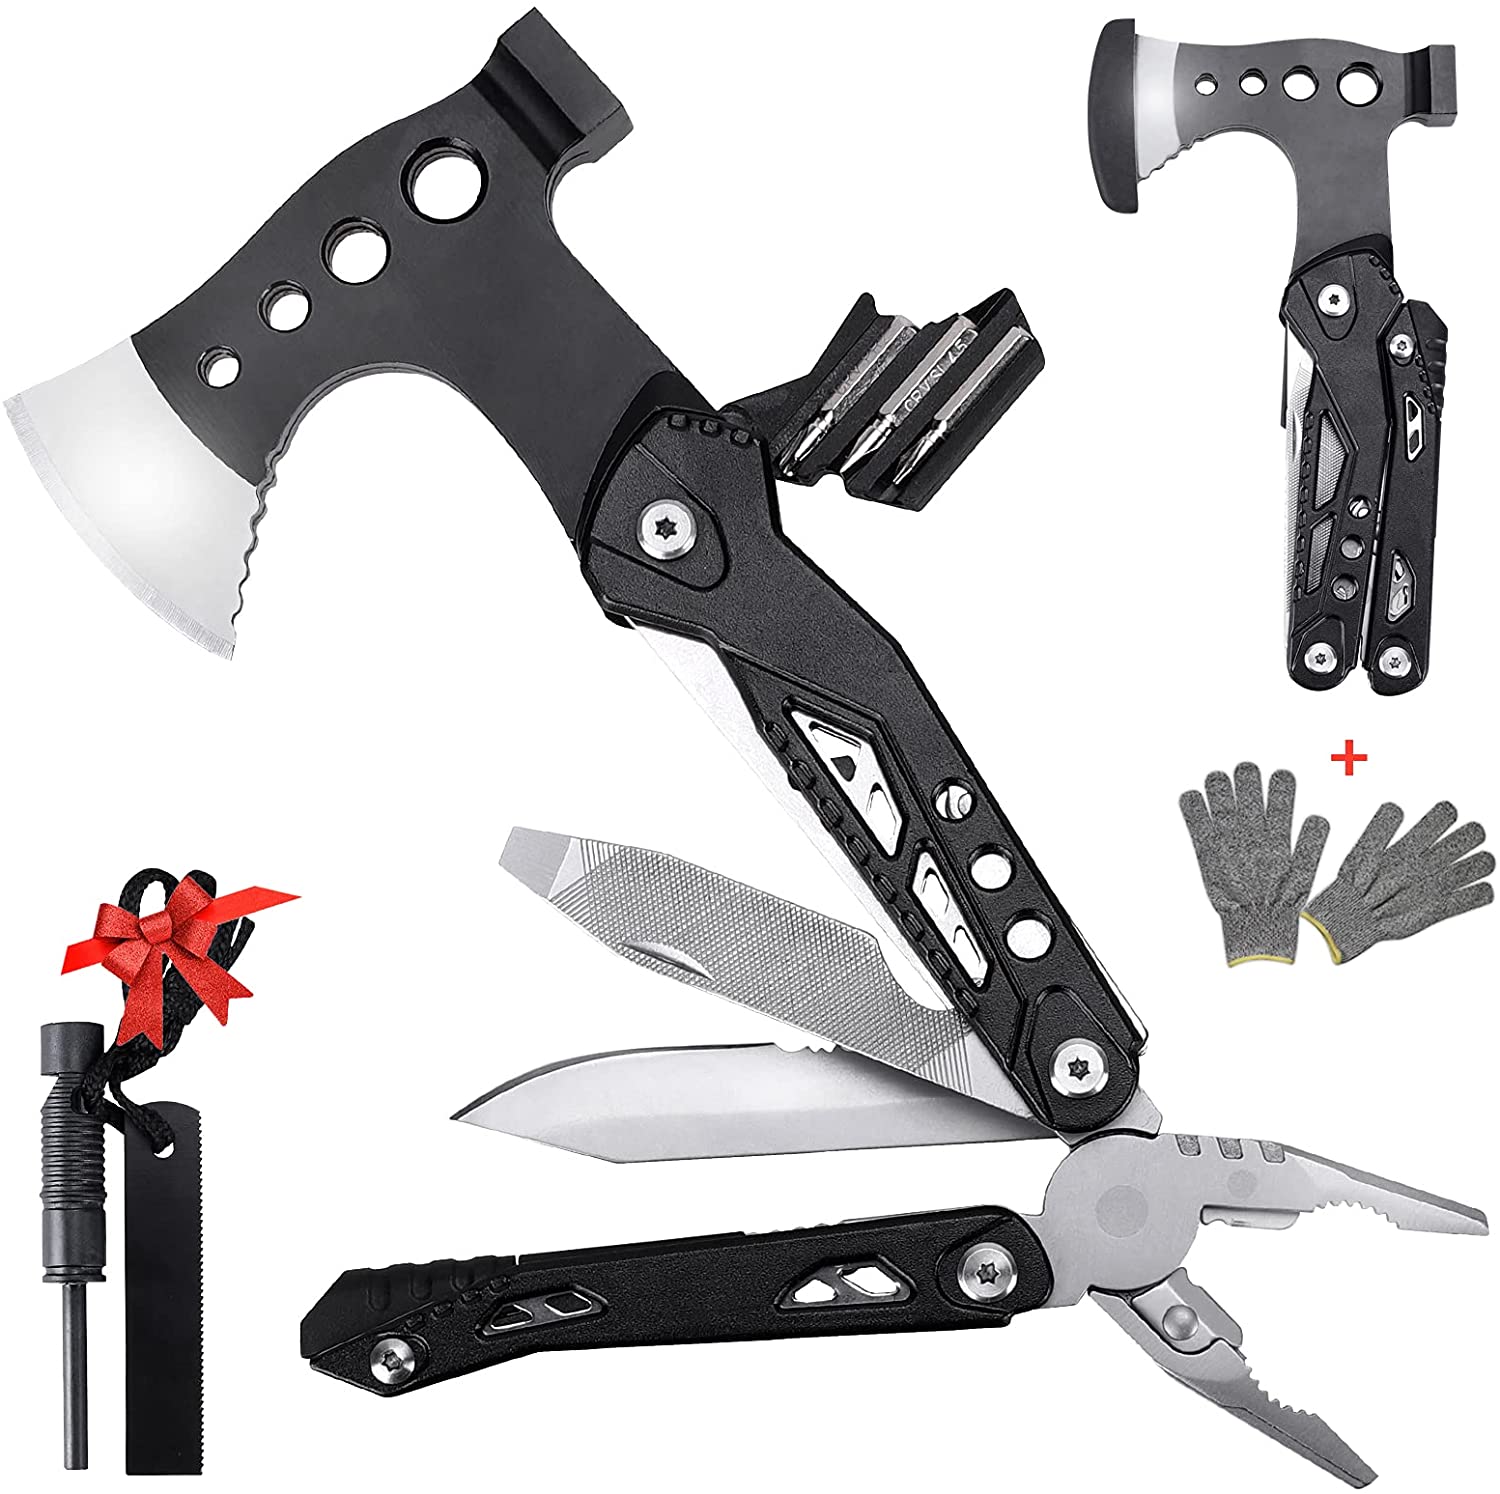 Pliers　14　Screwdrivers　Stuff　Wire　Survival　Multitool　Camping　Axe　Saw　Hatchet　Accessories　for　in　Gear　with　Tool　Dad　Cool　Birthday　Hammer　Cutter,　Anniversary　Gifts　Boyfriend　Husband